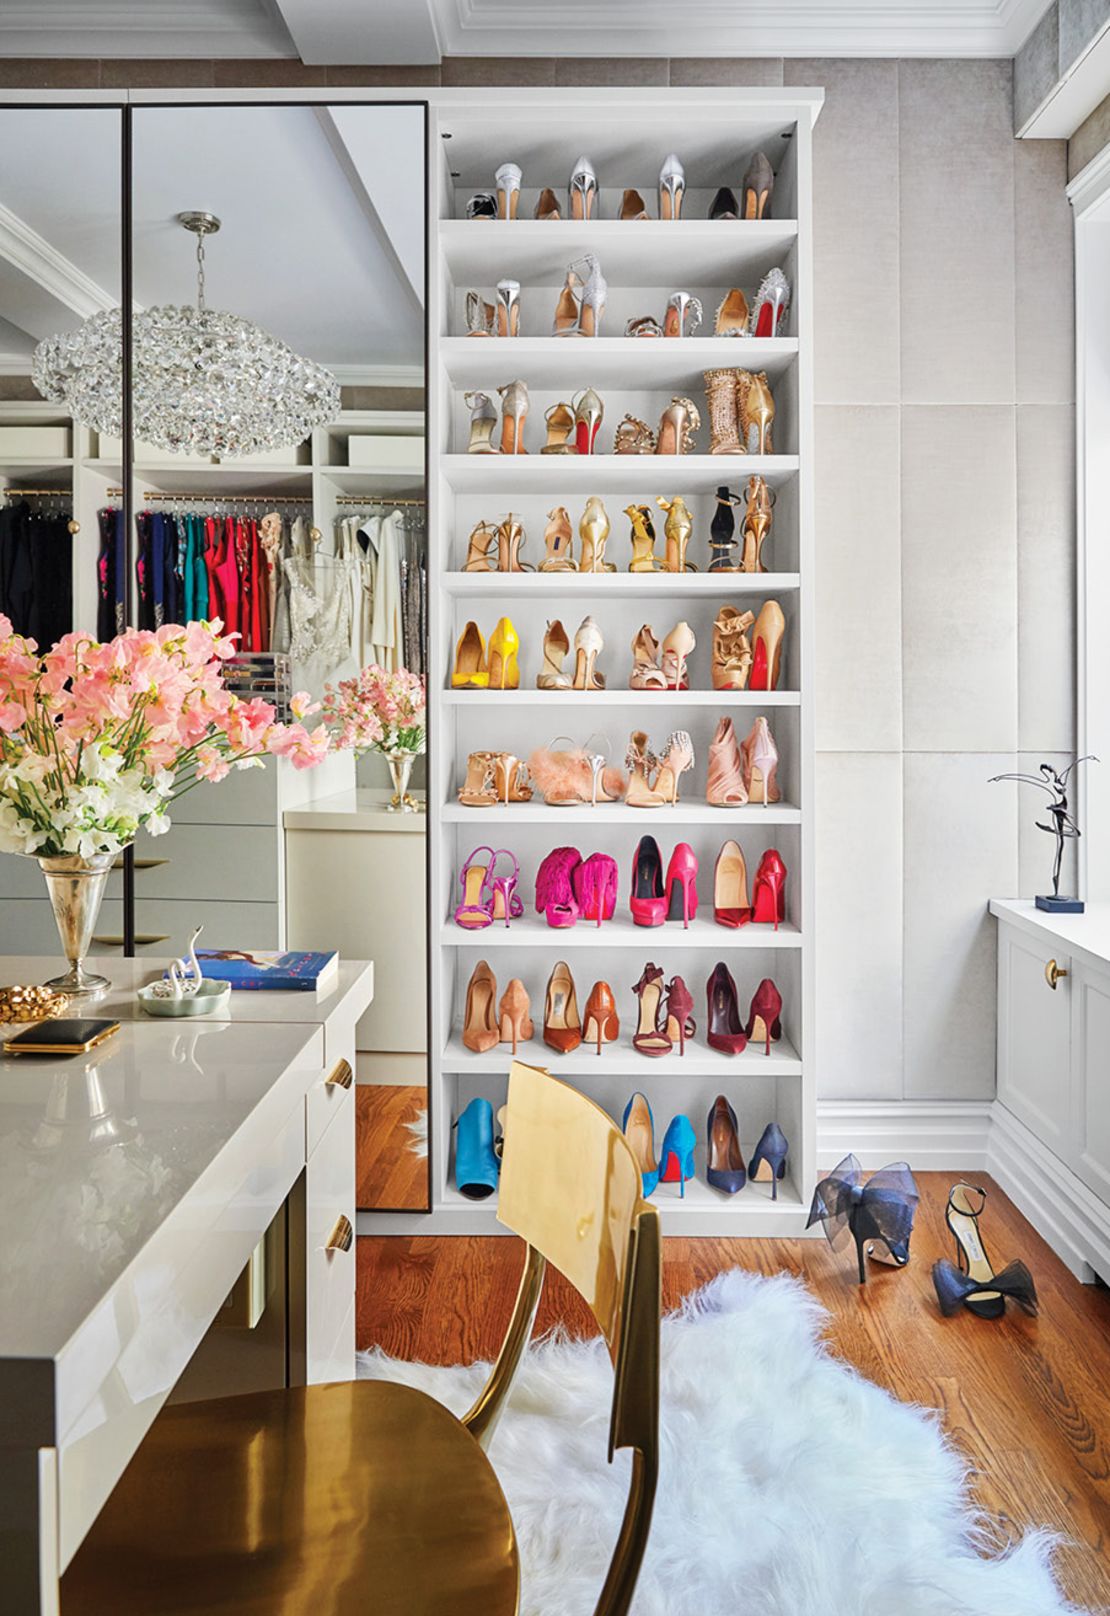 Misty Copeland's dressing room for Architectural Digest's October issue.